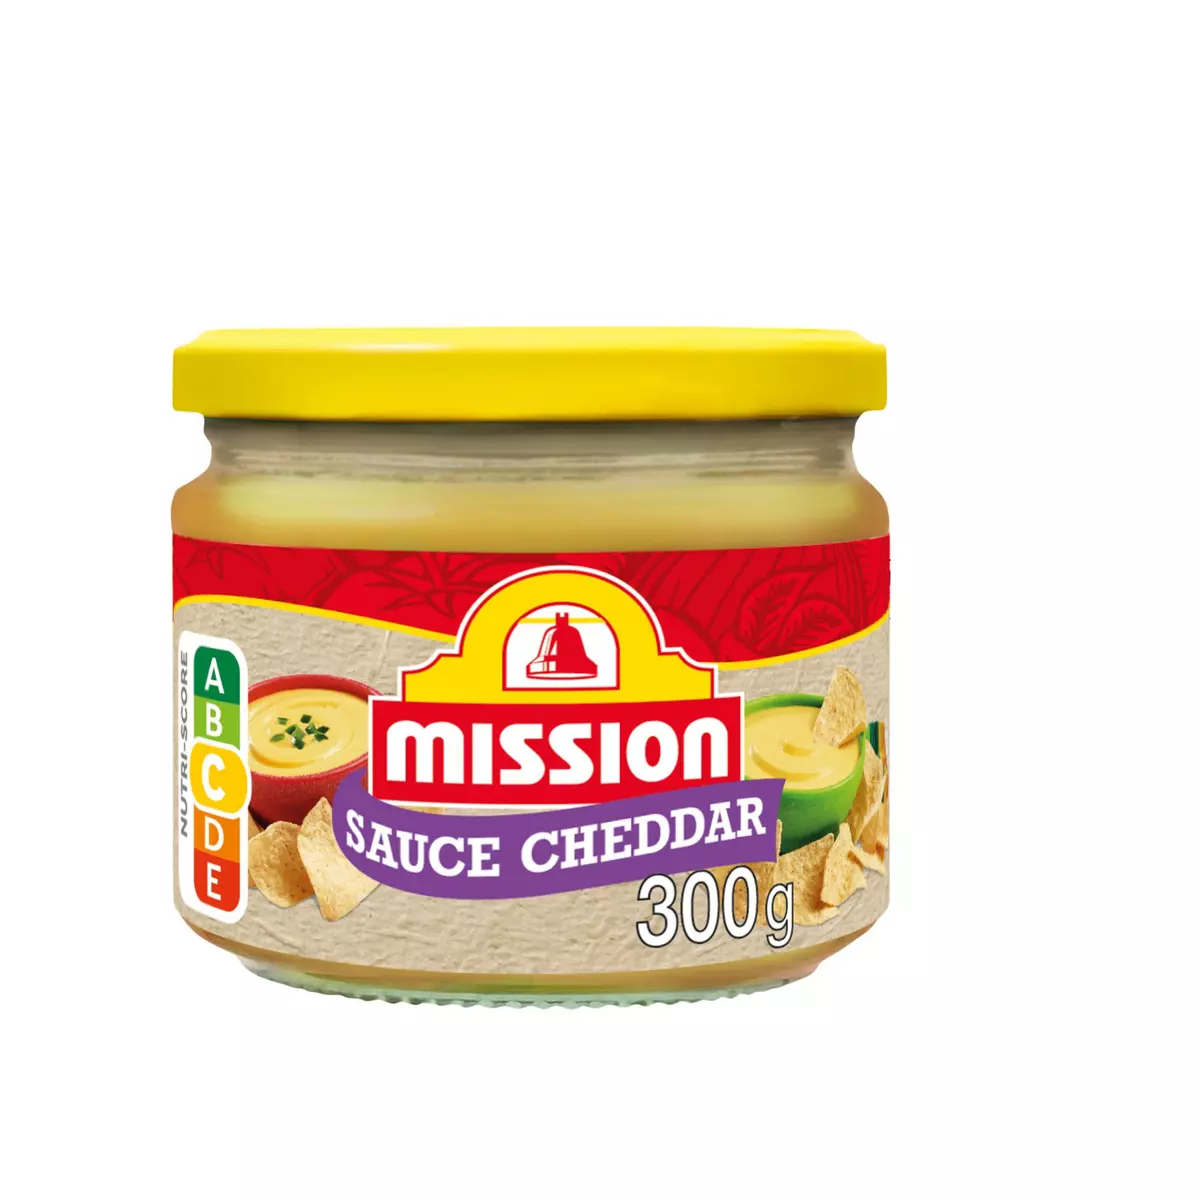 MISSION Sauce fromage cheddar bocal 300g